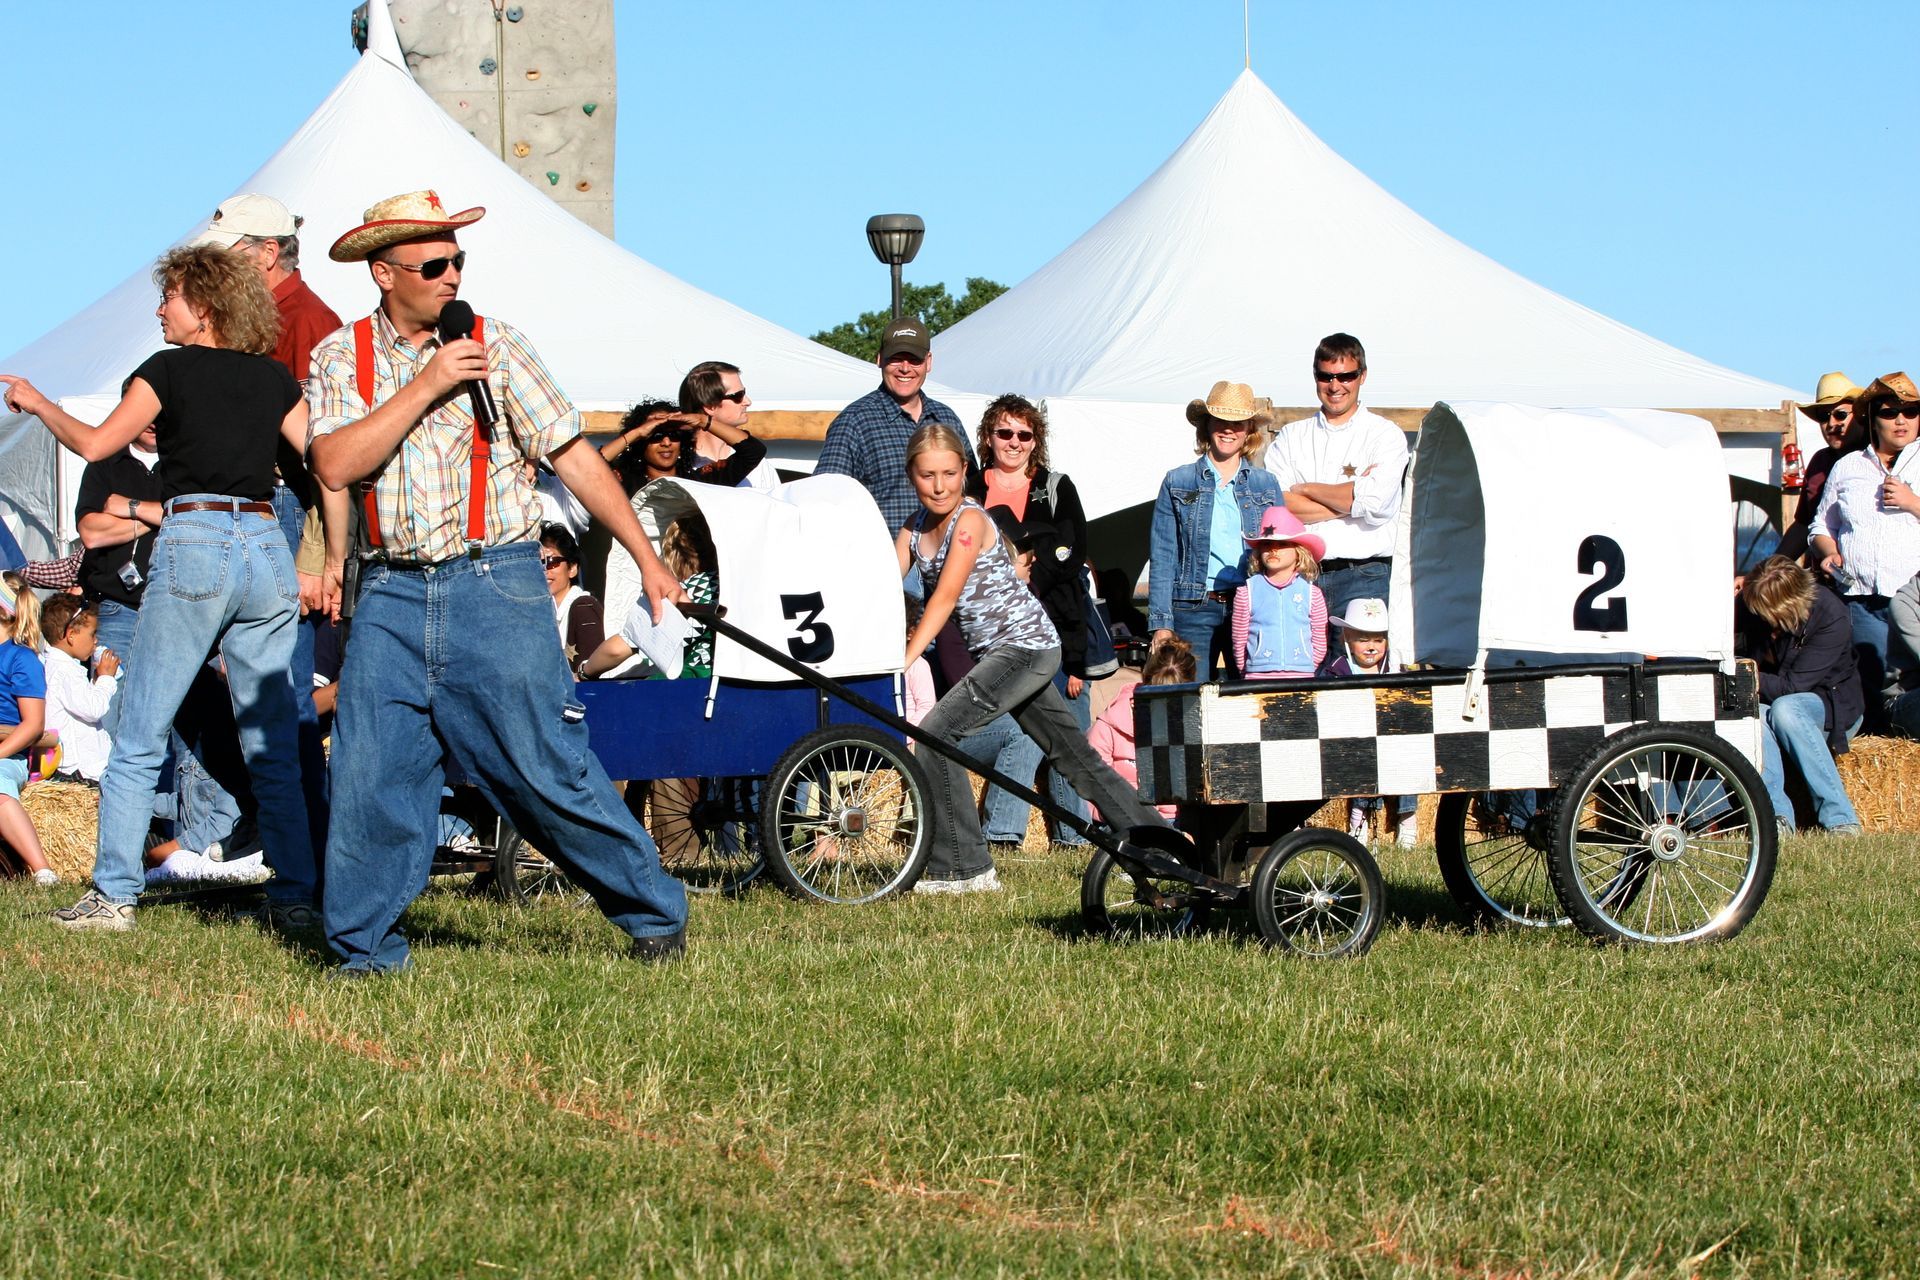 People participating in chuck wagon races at Calgary Stampede Event